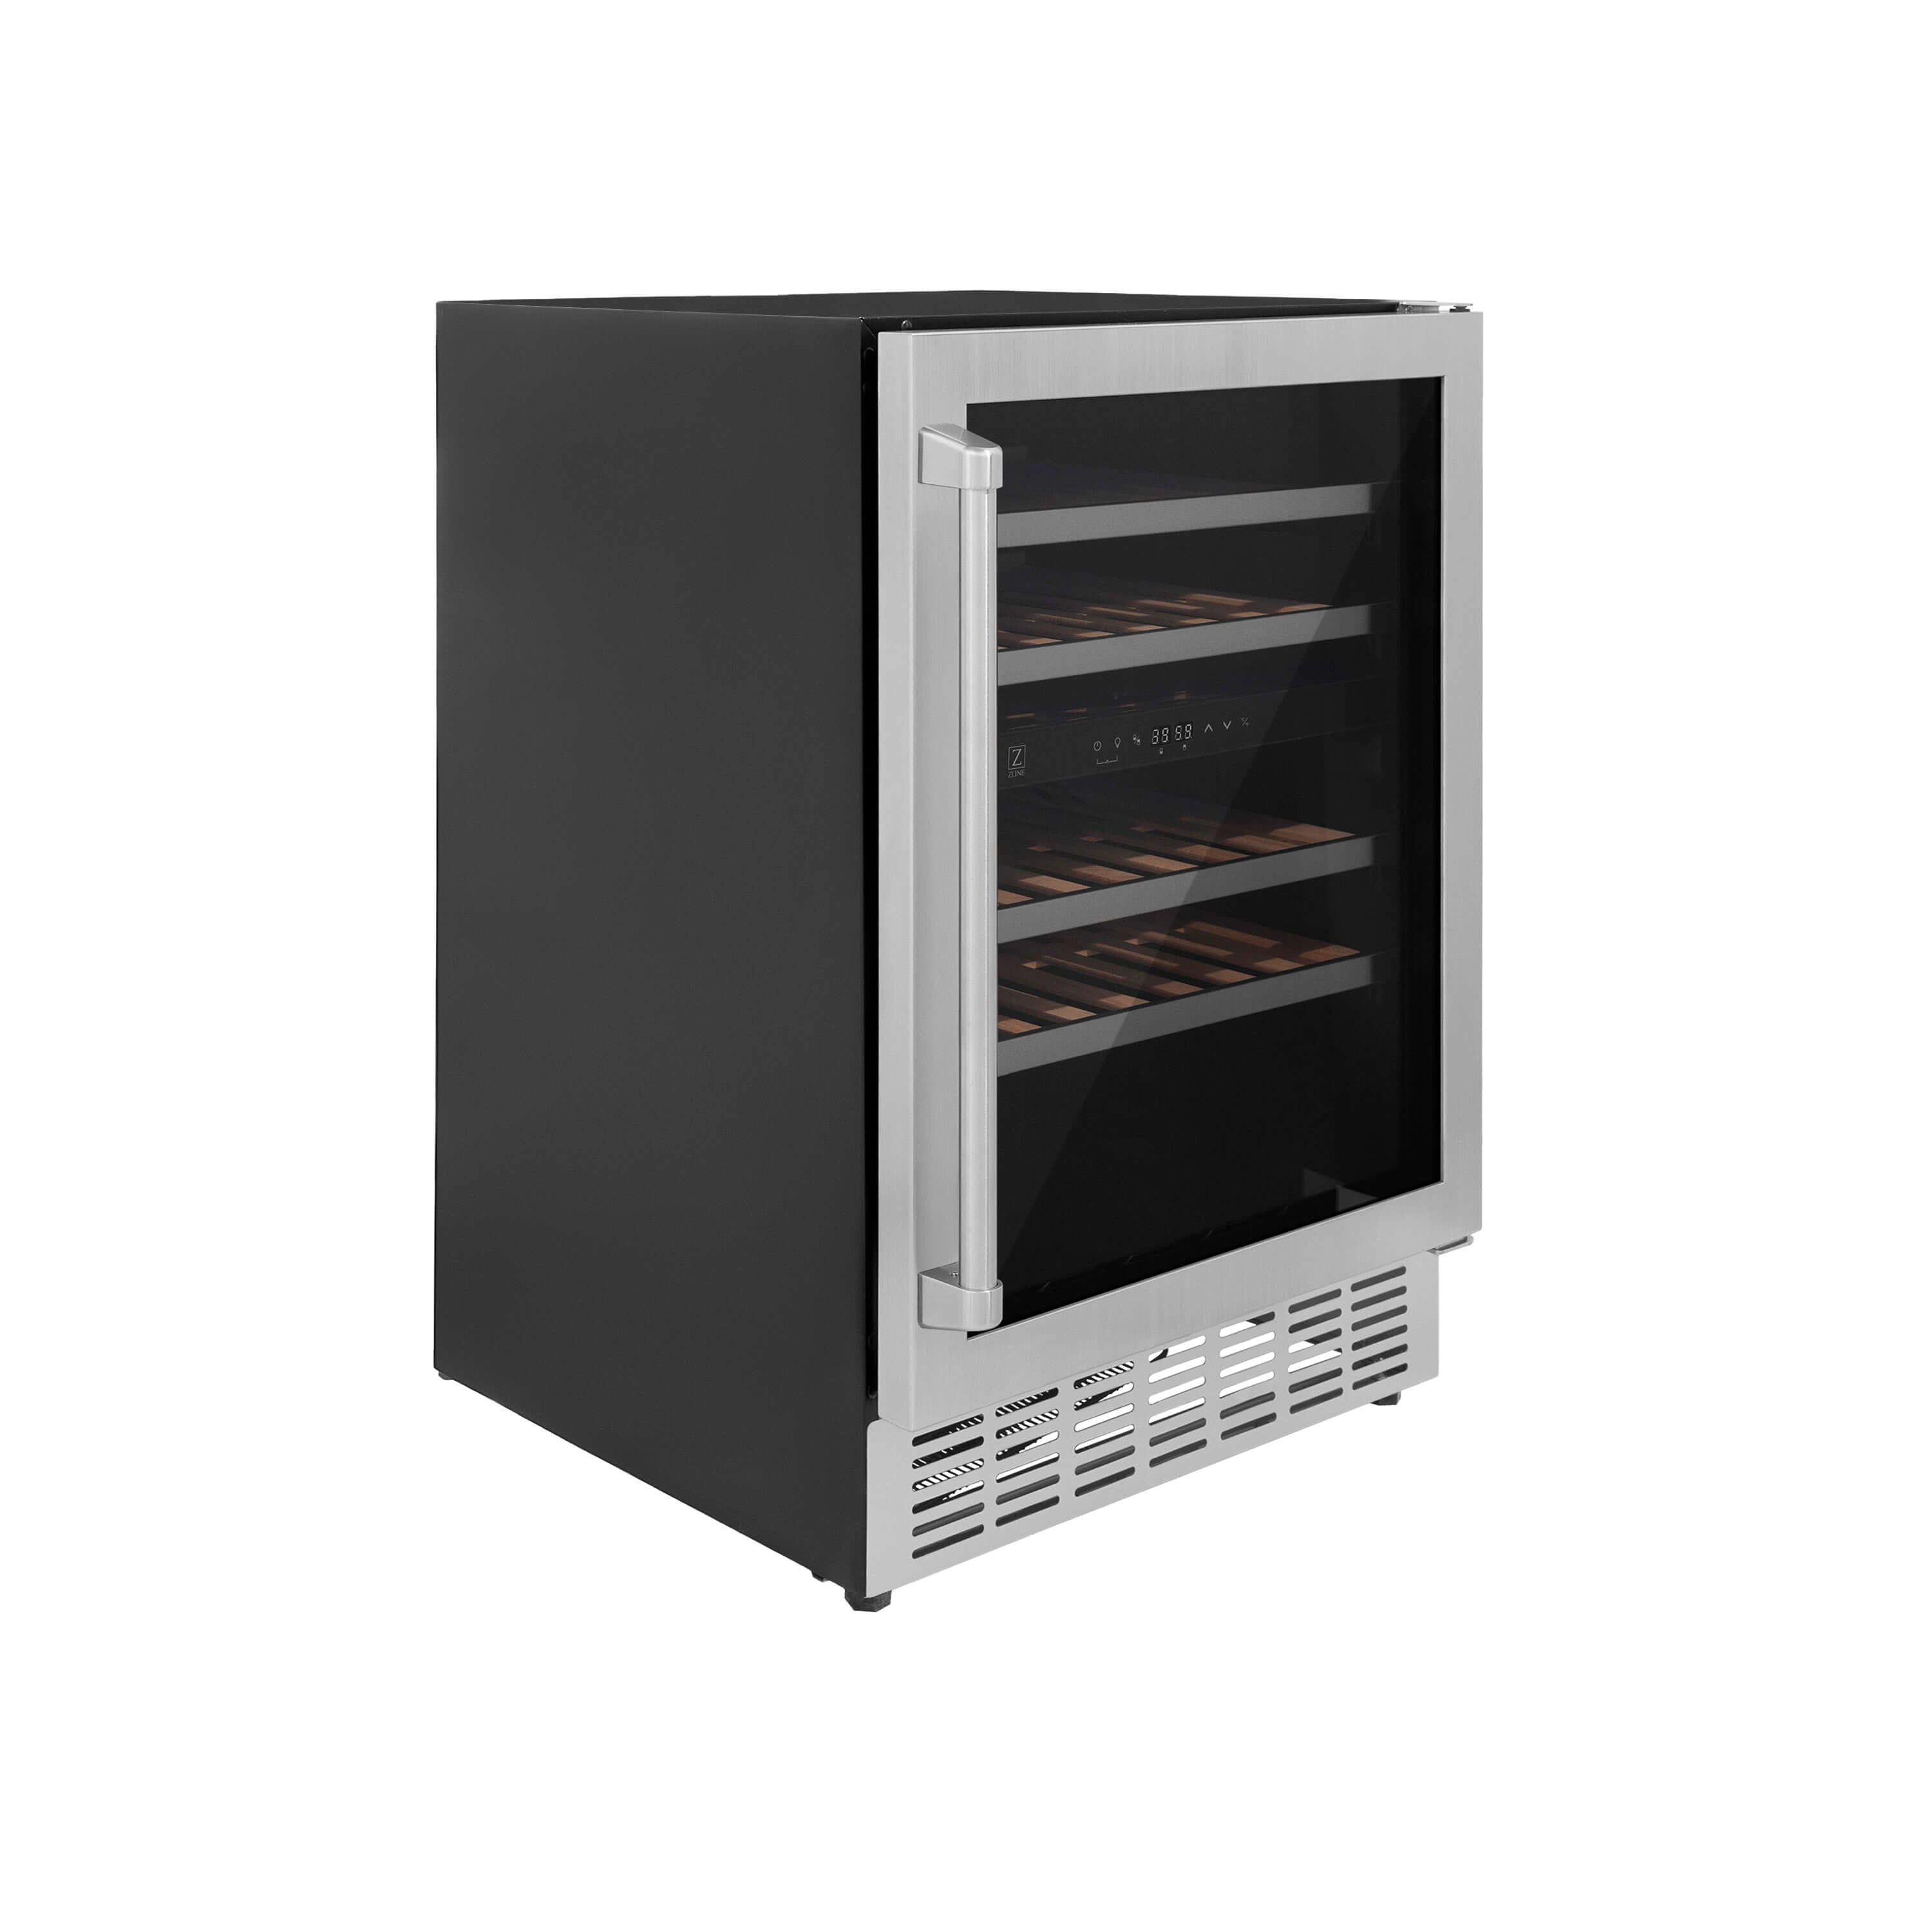 ZLINE 24 In. Monument Dual Zone 44-Bottle Wine Cooler in Stainless Steel with Wood Shelf (RWV-UD-24) side, closed.